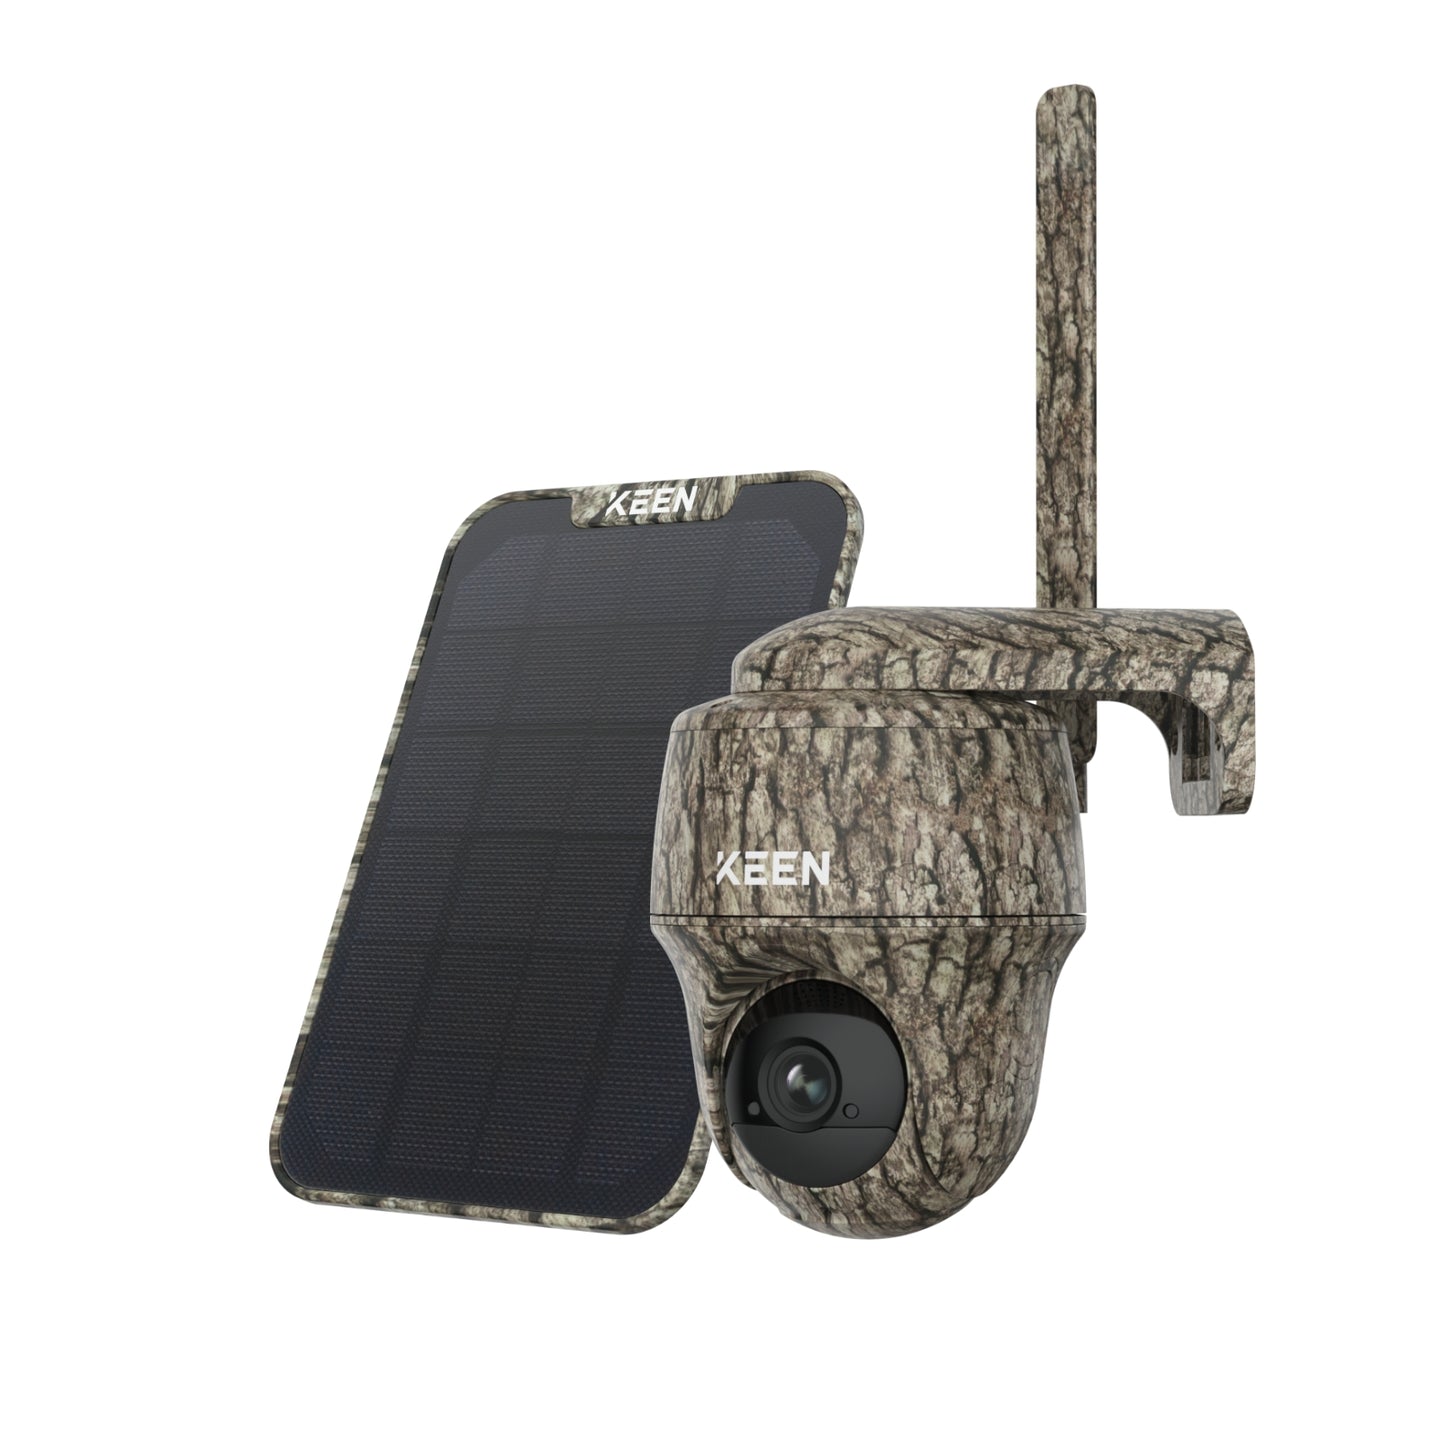 Keen PT Plus 4G Game Camera inkl. Solpanel